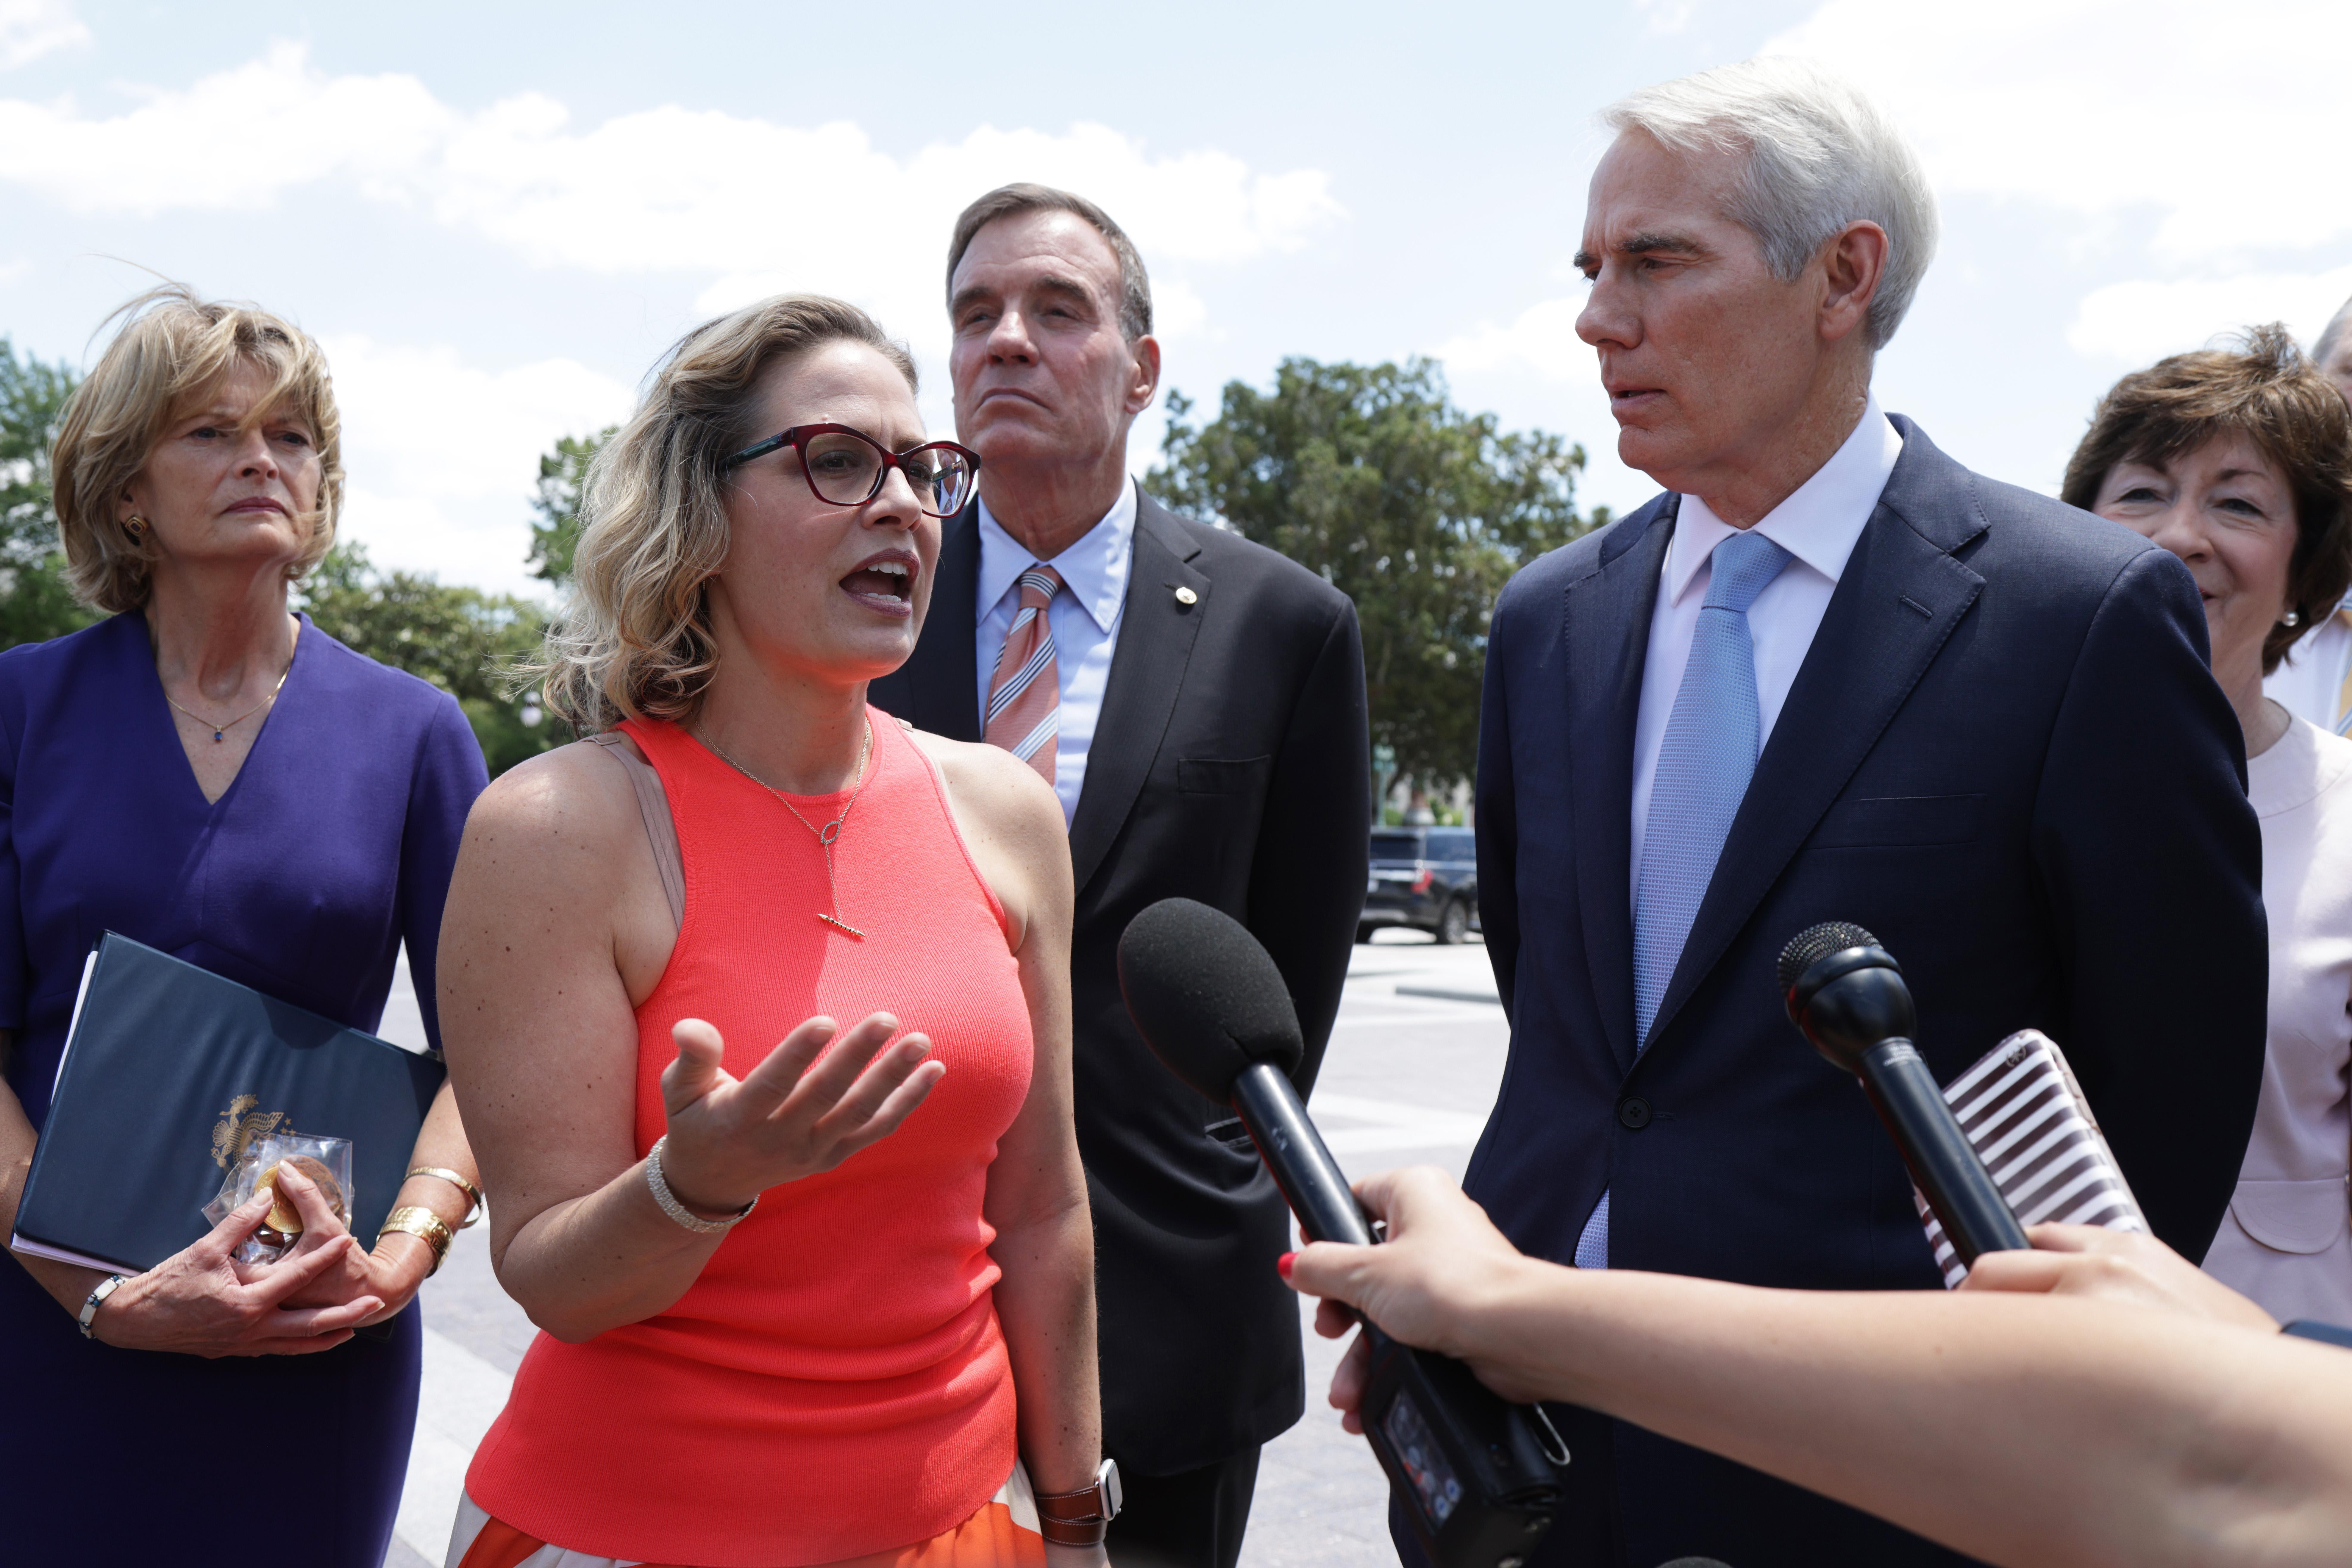 Sinema gestures with one hand as she speaks before a microphone held out by a reporter. Murkowski, Warner, Portman, and Collins stand around her outside.